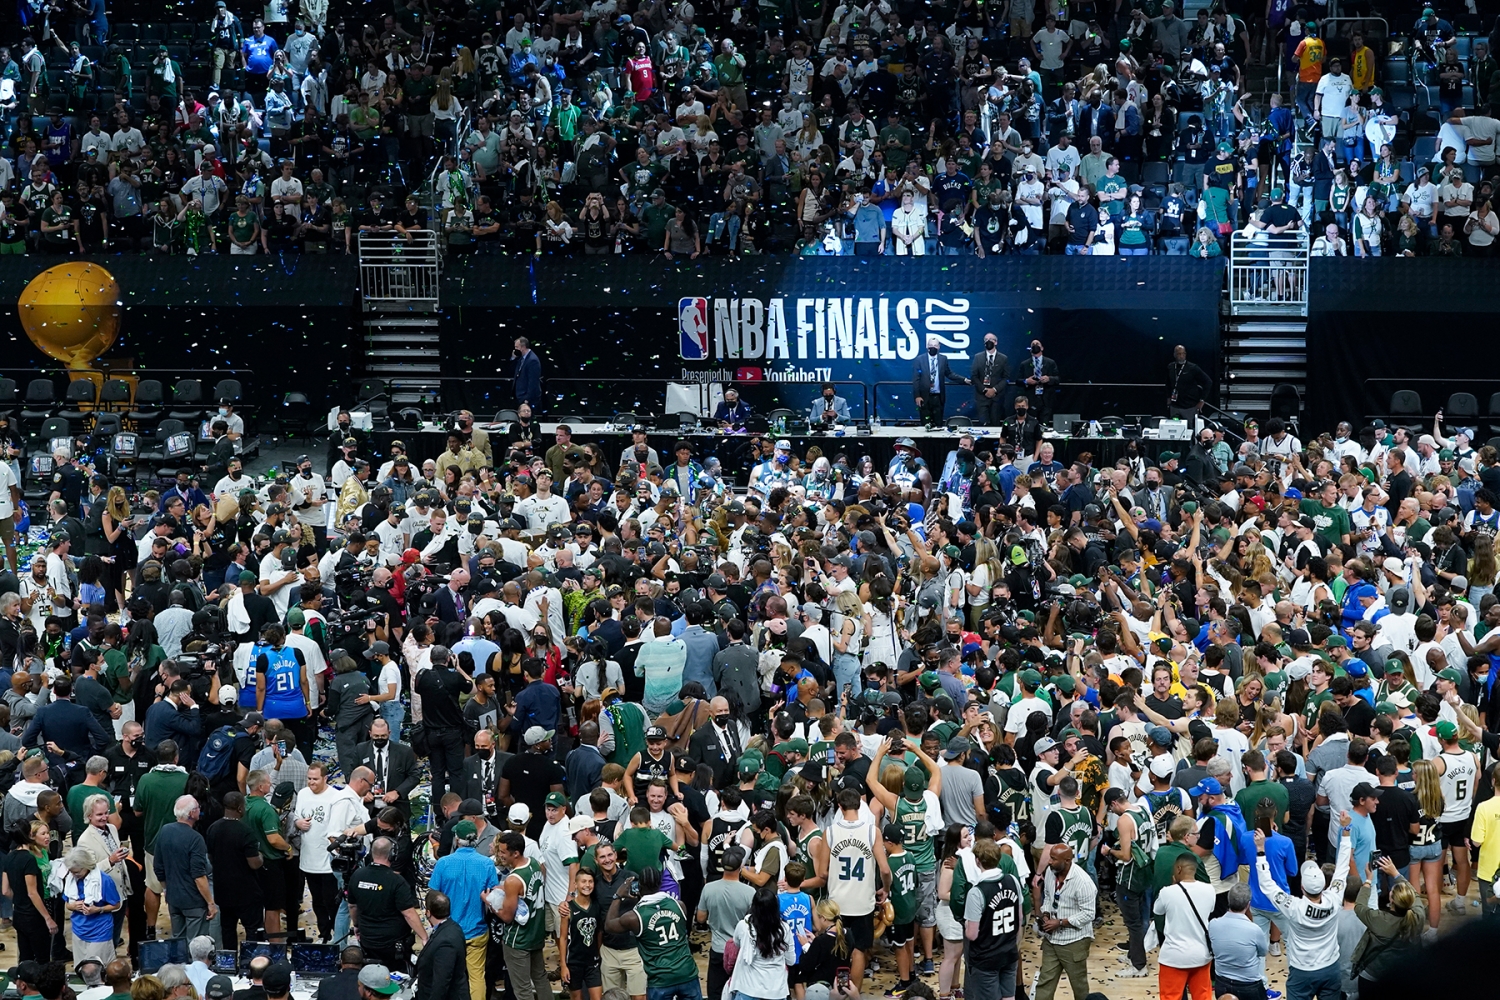 The court is covered with people in celebration after the Milwaukee Bucks beat the Phoenix Suns 105-98 in Game 6 of basketball's NBA Finals in Milwaukee, Tuesday, July 20, 2021. (AP Photo/Paul Sancya)